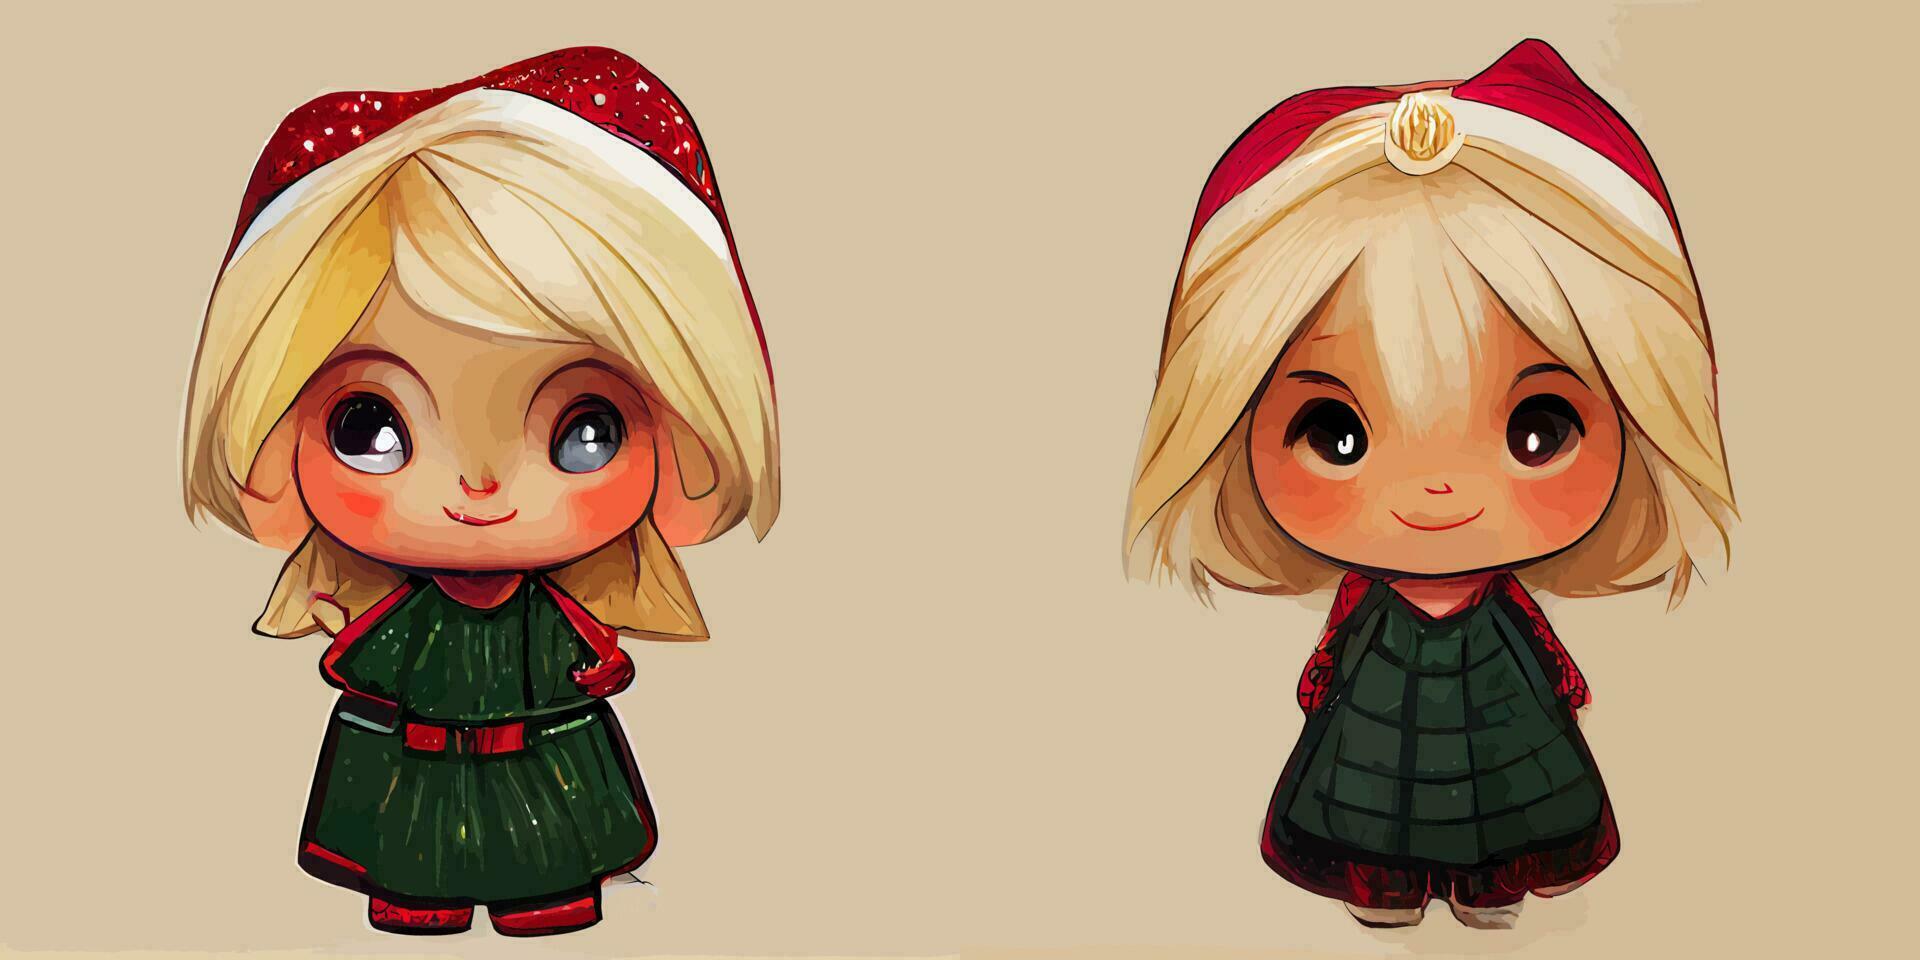 illustration vector set of cute cartoon character chibi girl using Christmas costume with Santa hat isolated perfect for kid greeting card